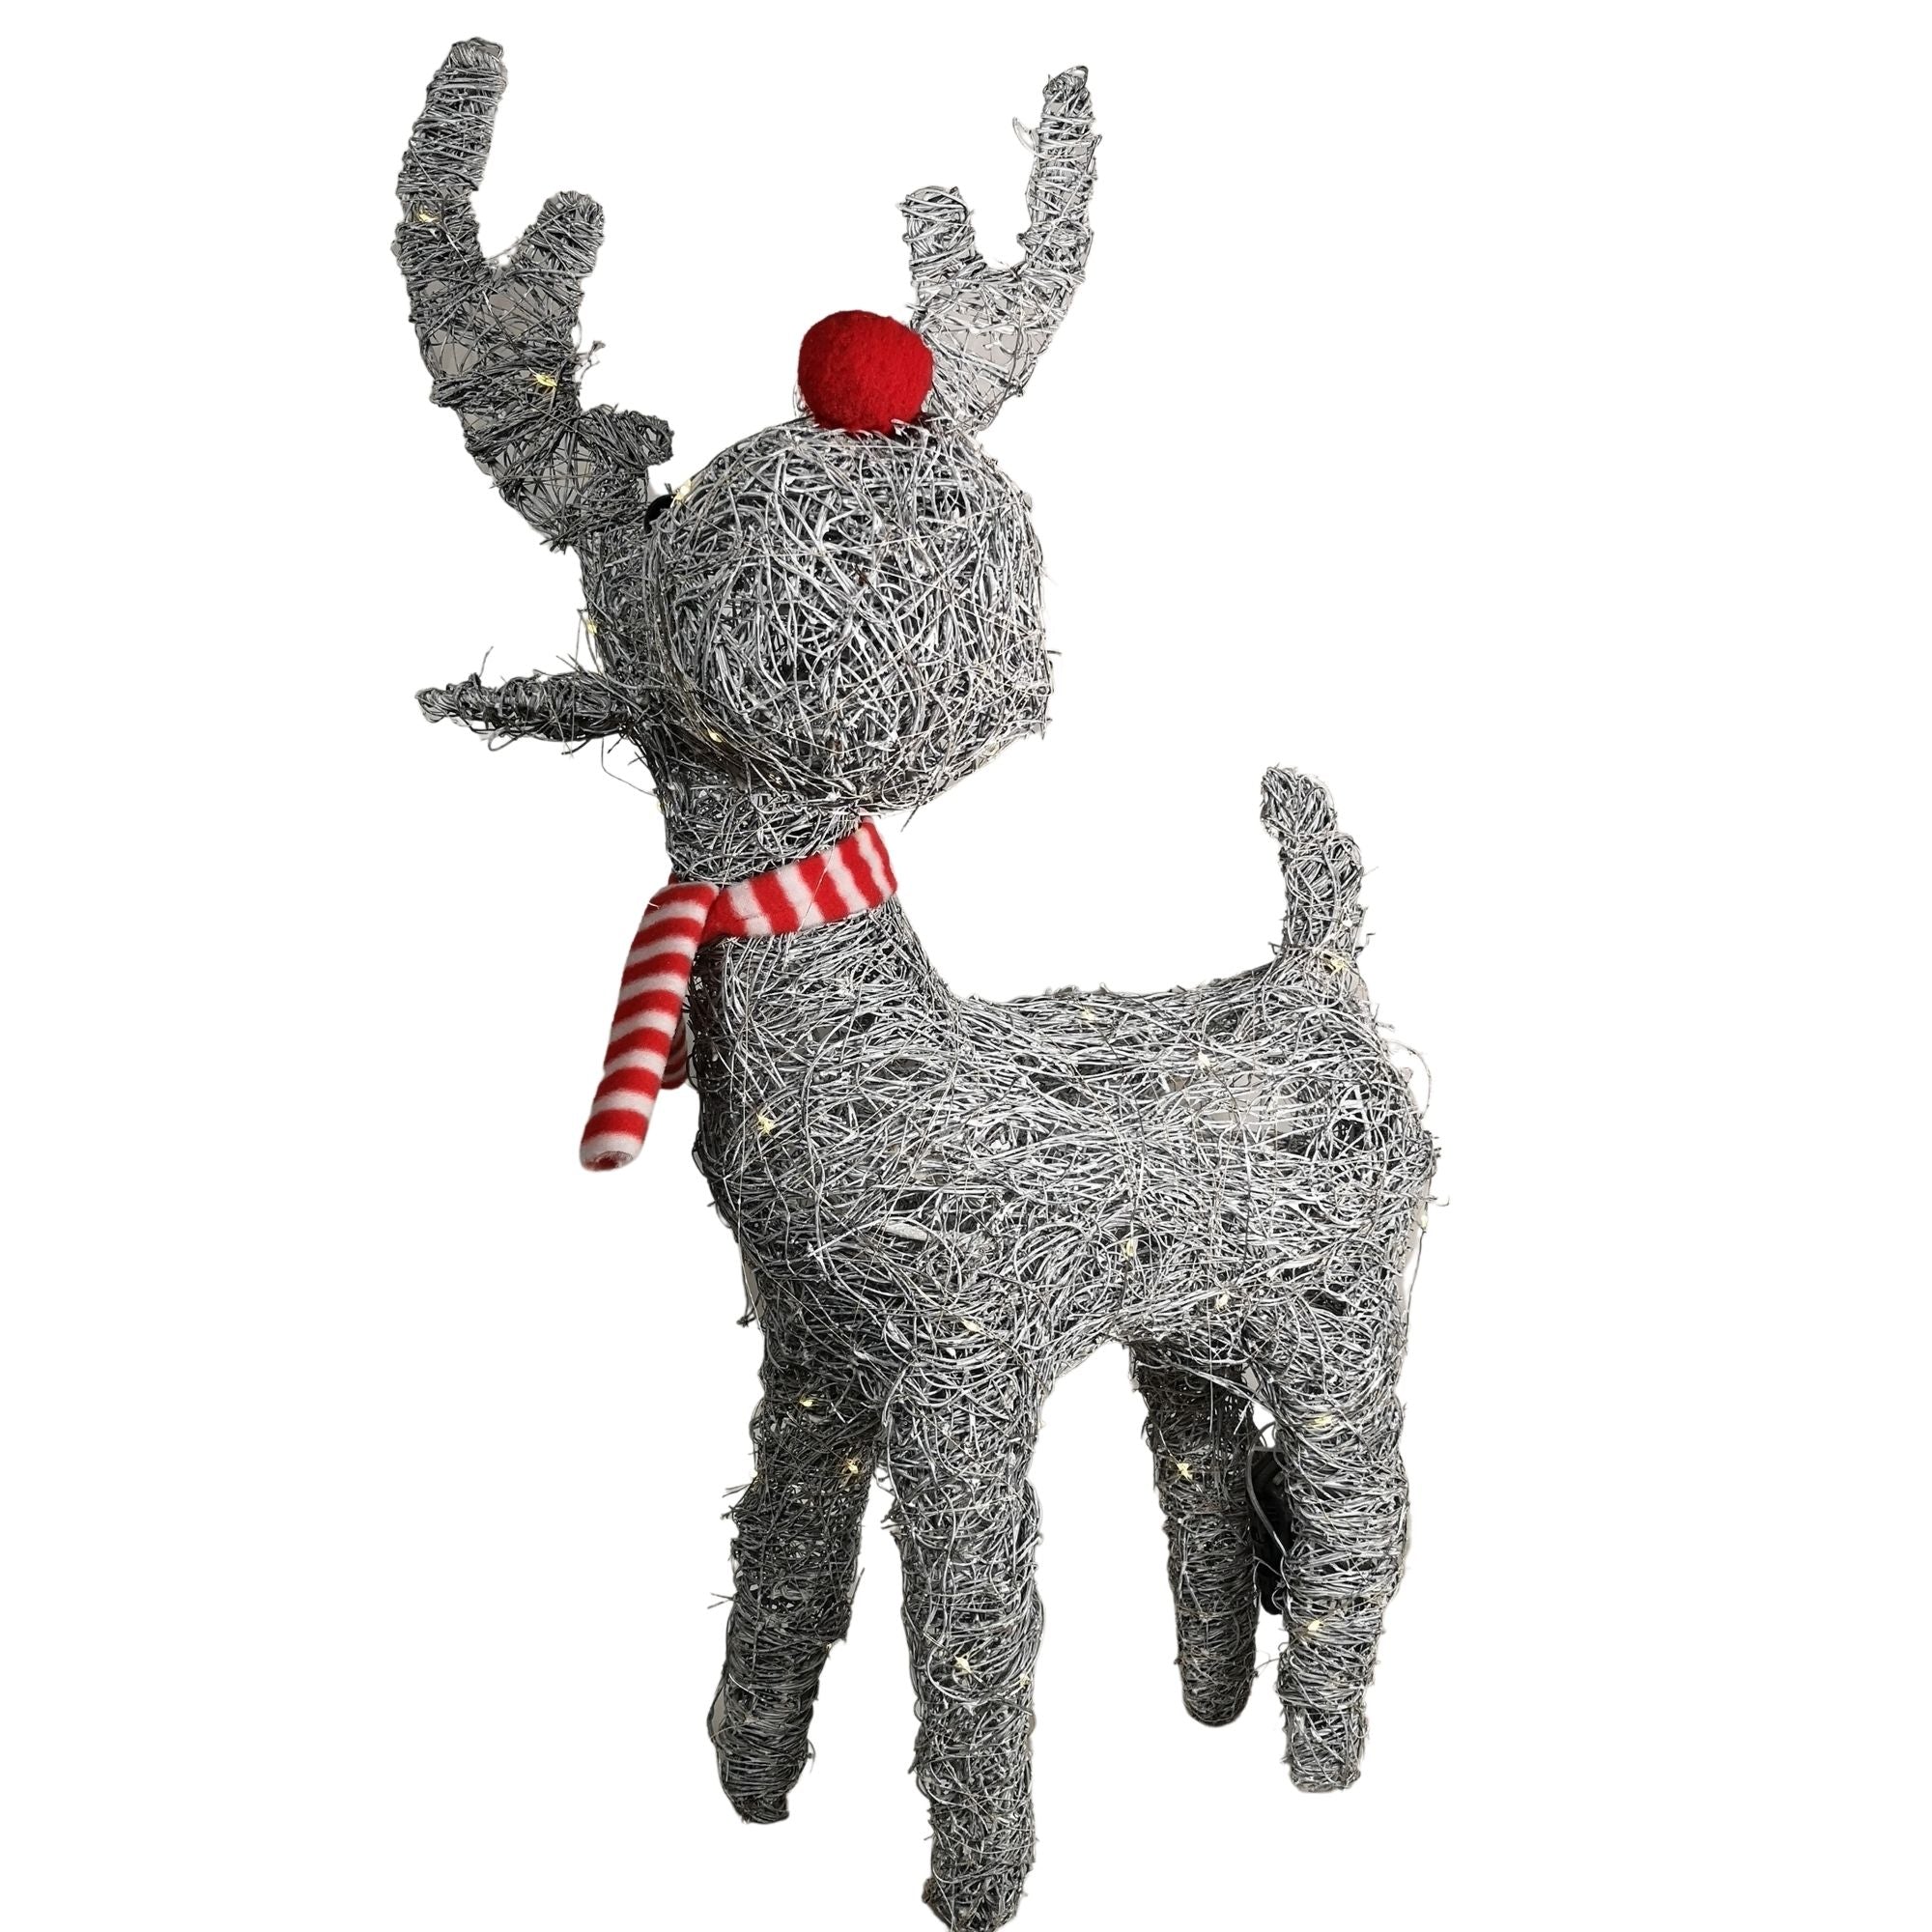 66cm Battery Operated Rattan Woven Cupid Reindeer with Warm White LEDs